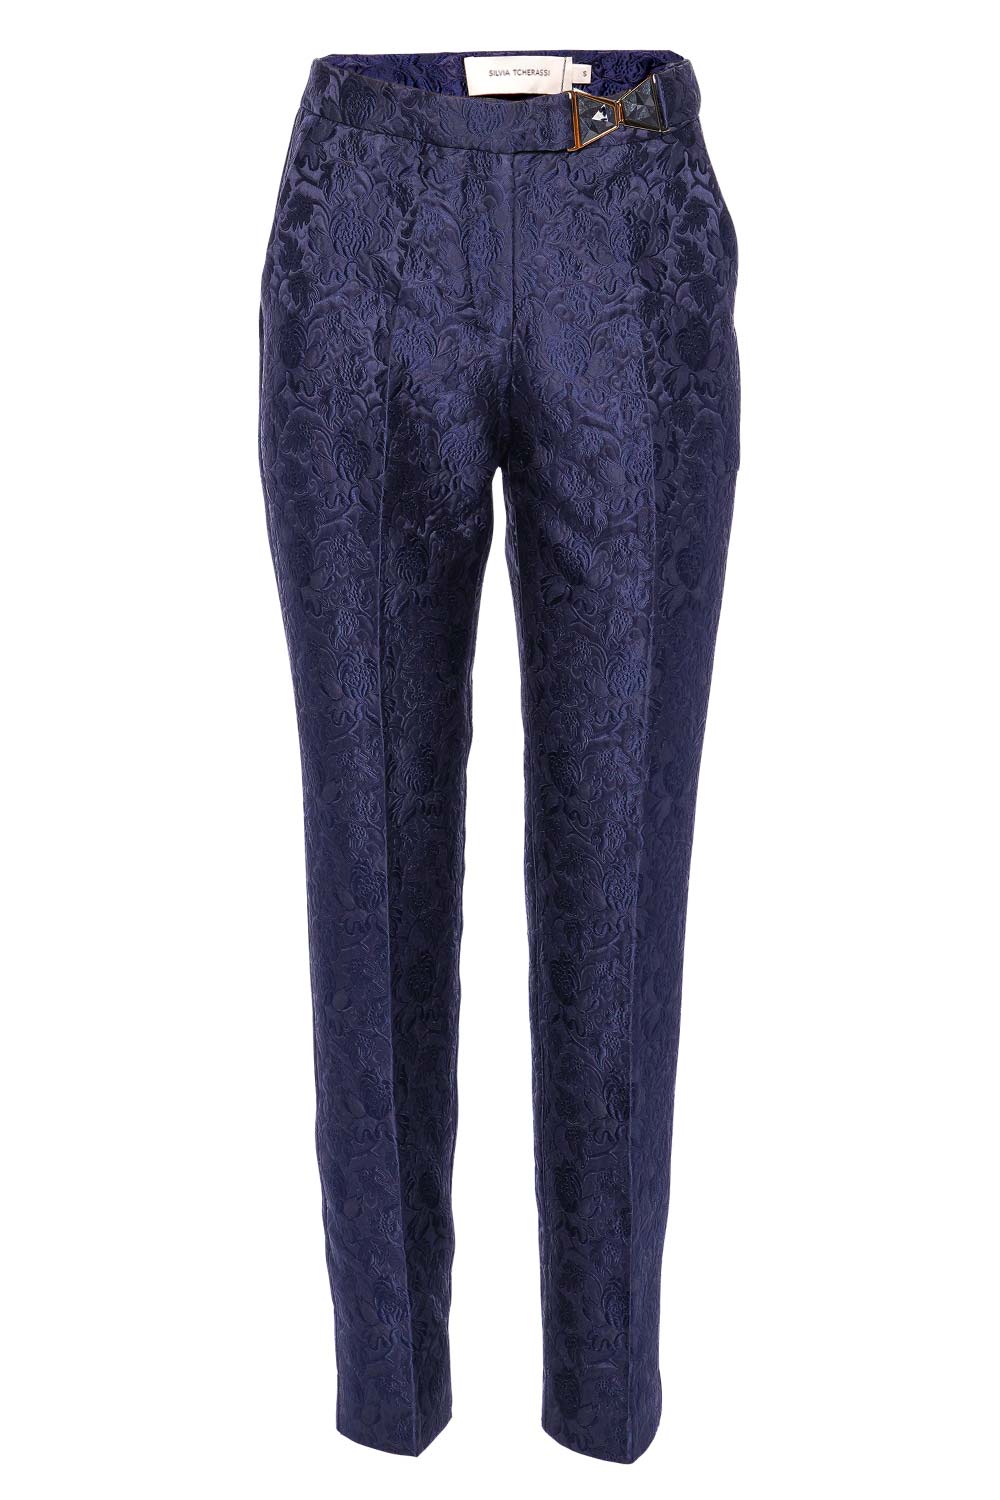 Silvia Tcherassi Orion Navy Tapered Pants